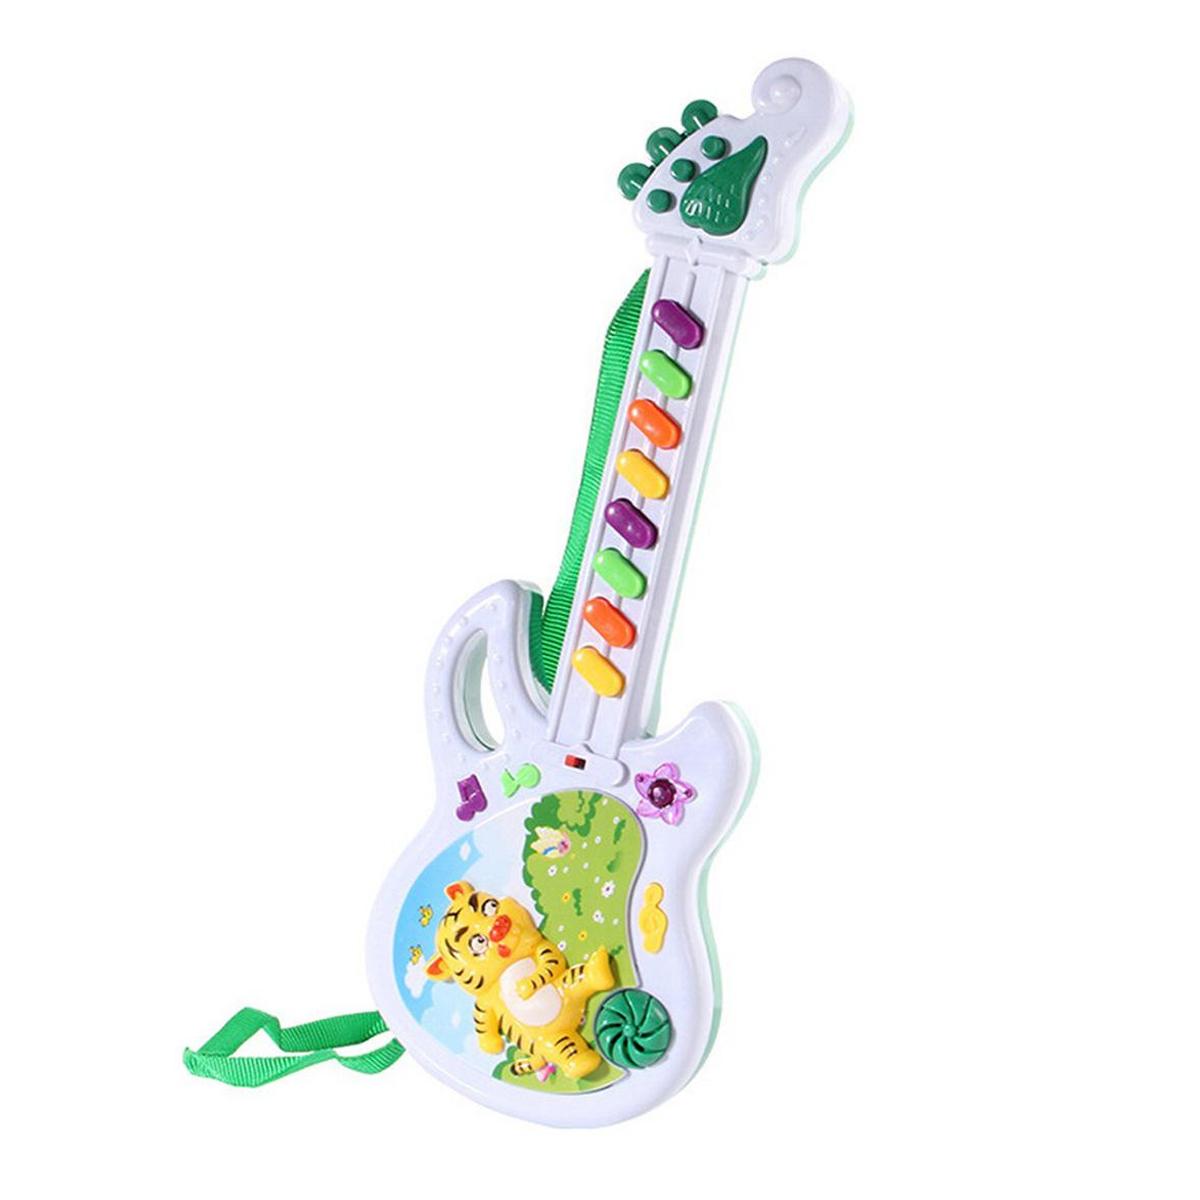 Musical Guitar Toy for Kids - 12inch